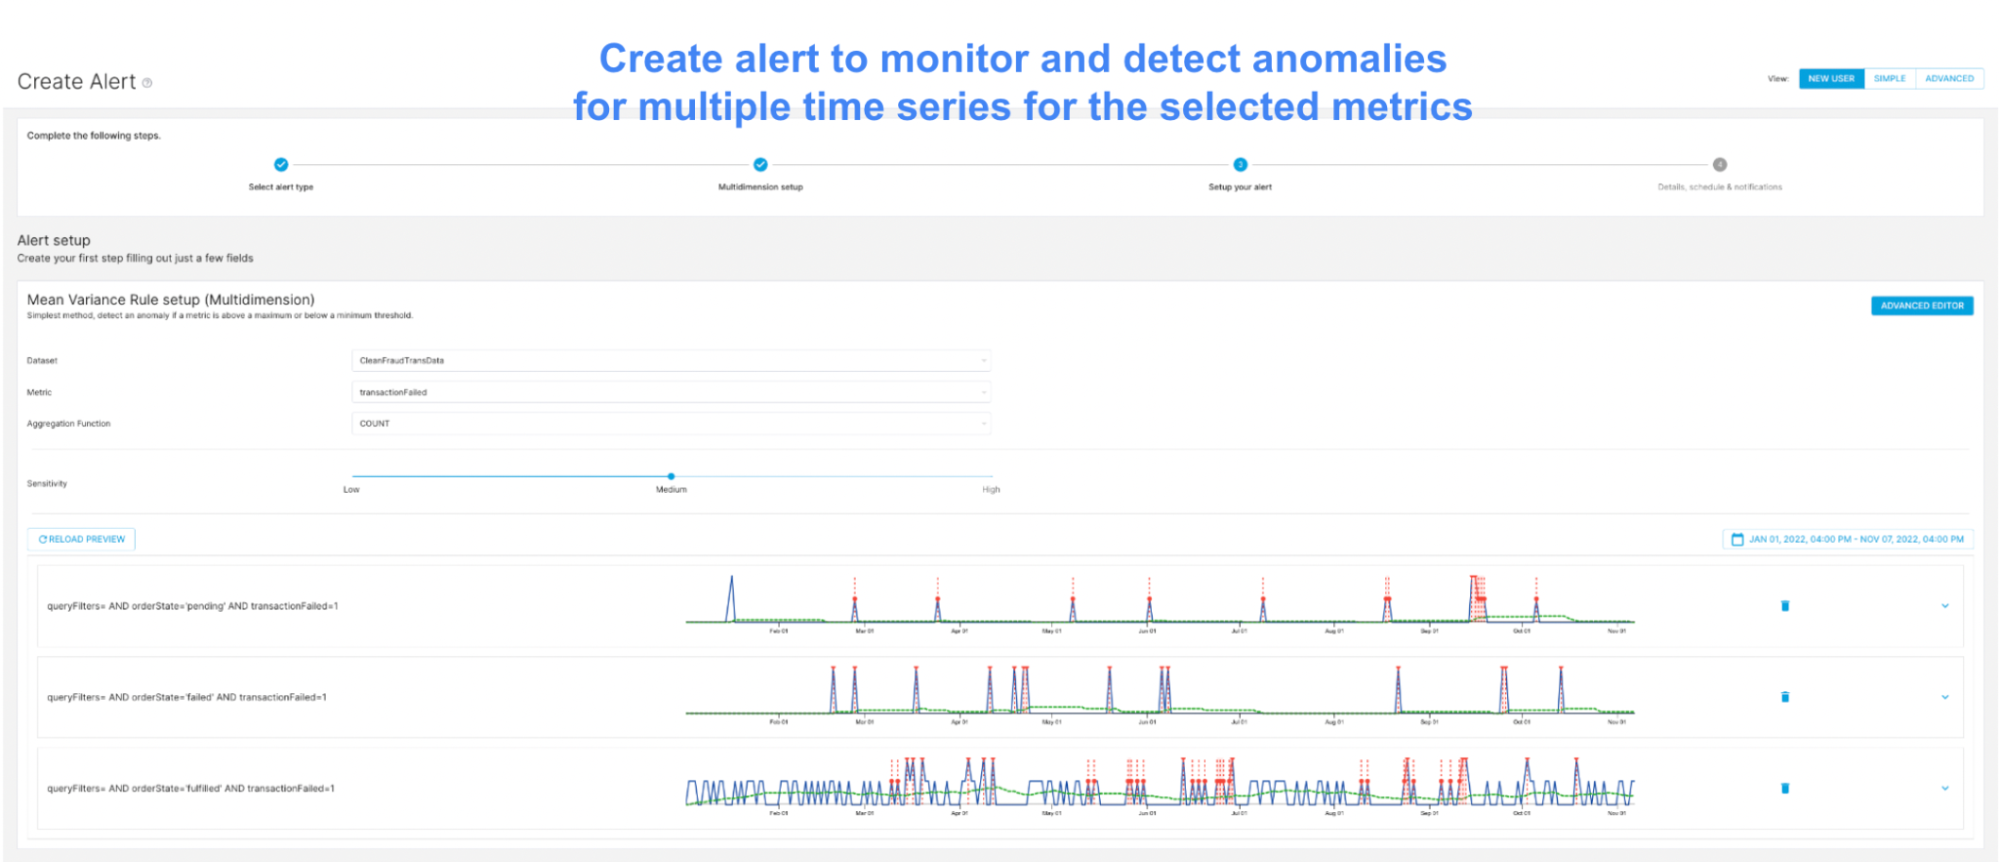 Sample alert creation in StarTree ThirdEye aimed at detecting anomalies for multiple time series